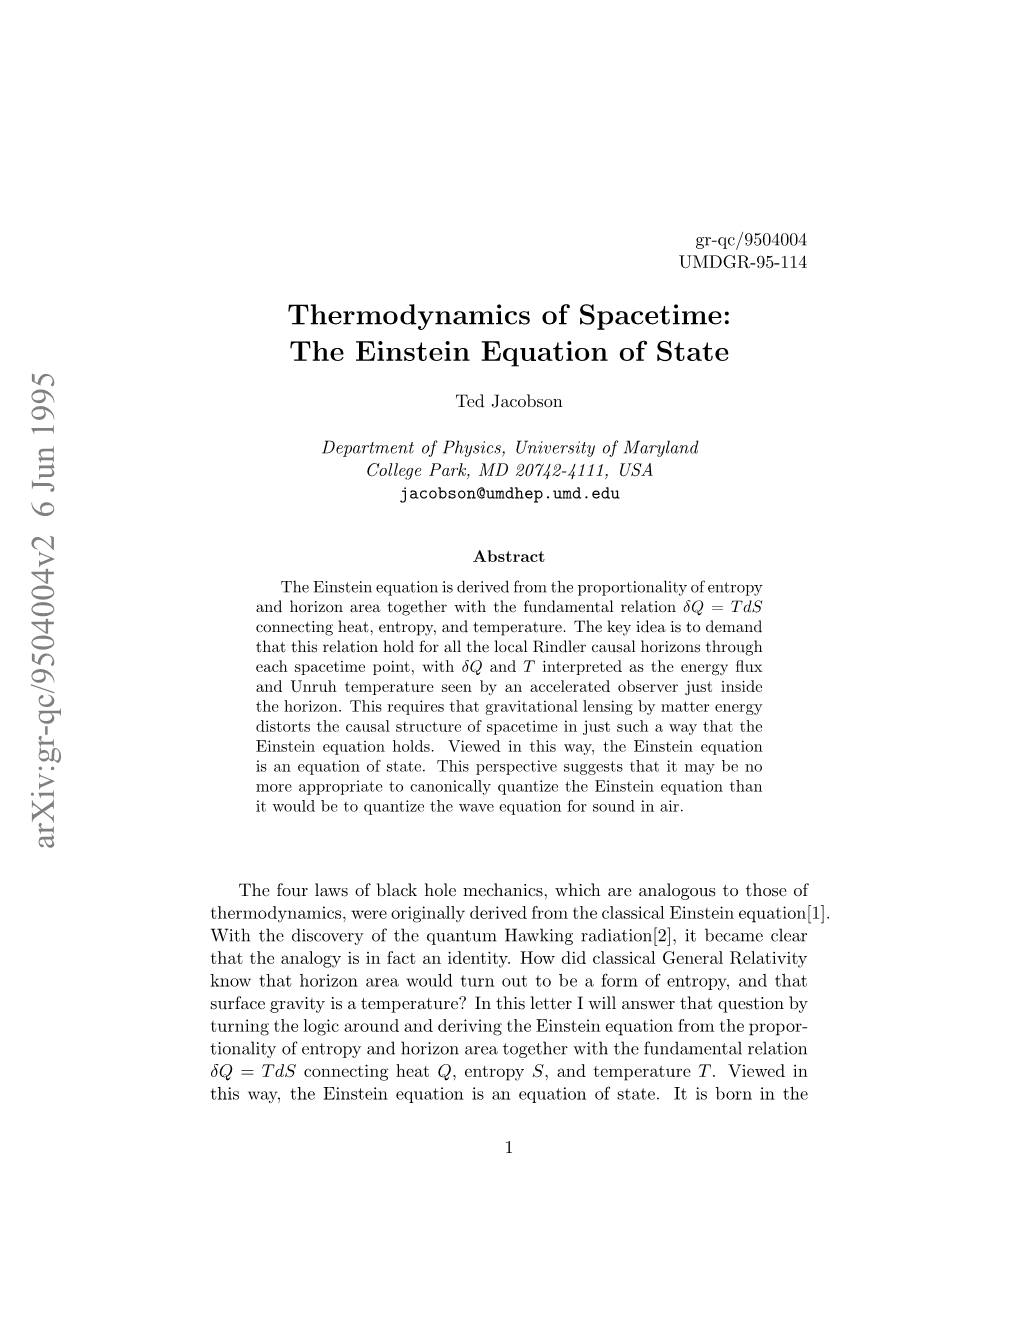 Thermodynamics of Spacetime: the Einstein Equation of State